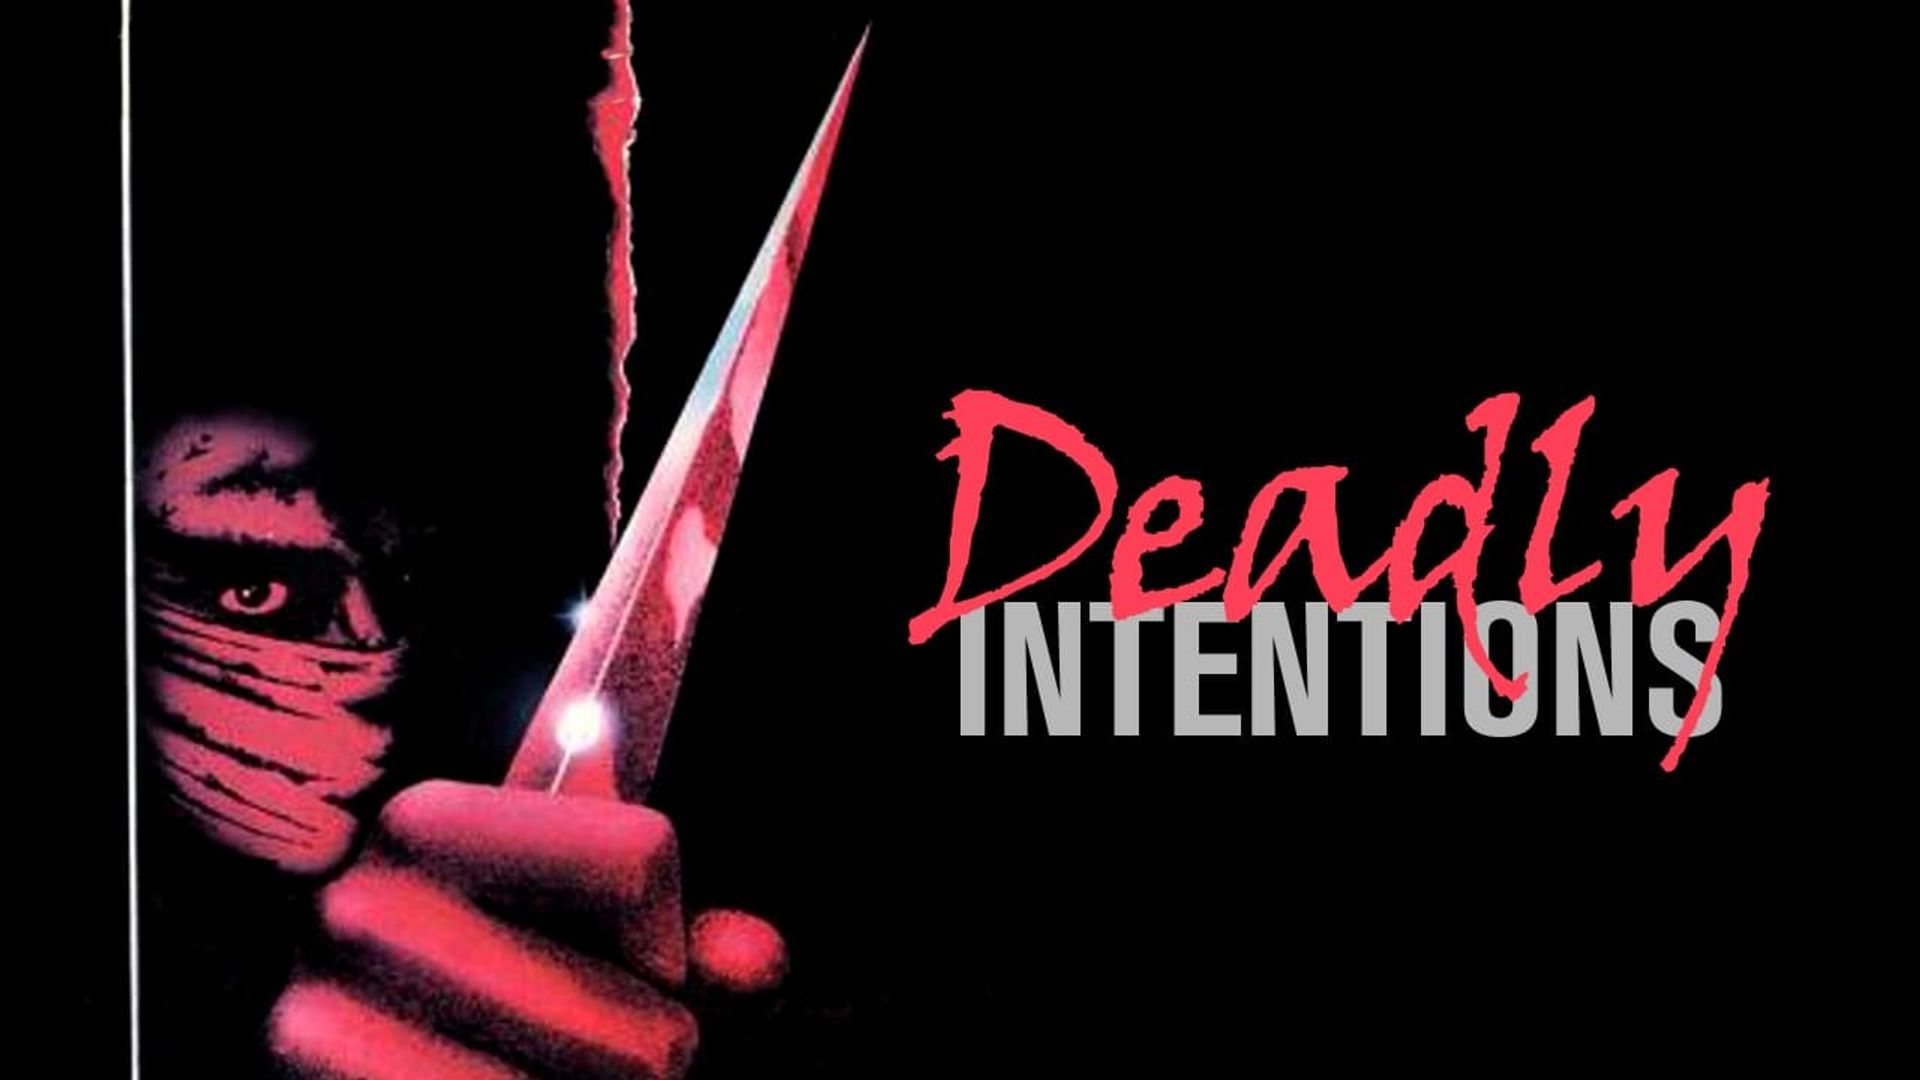 Deadly Intentions background